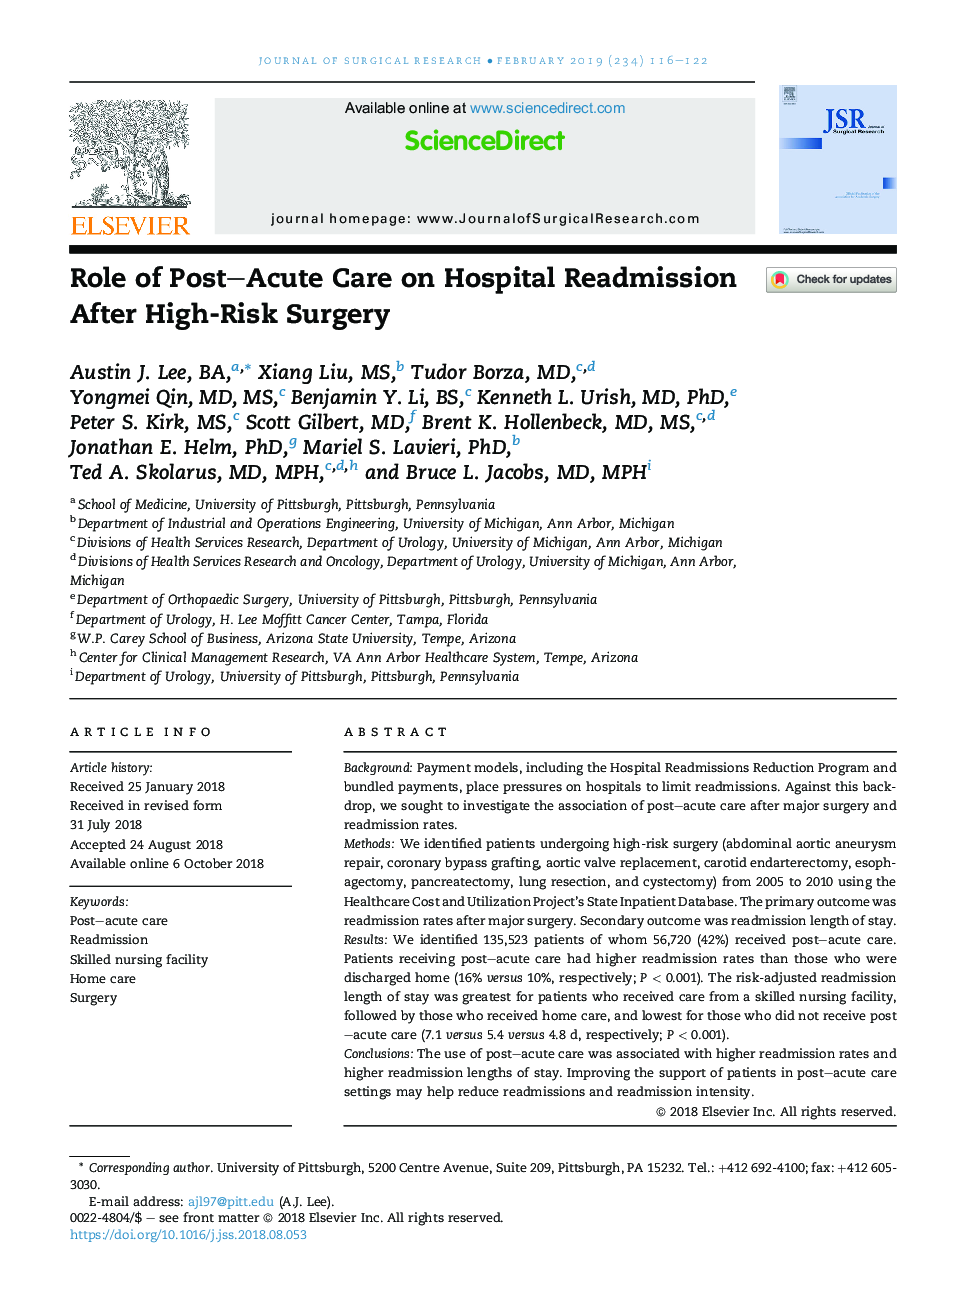 Role of Post-Acute Care on Hospital Readmission After High-Risk Surgery